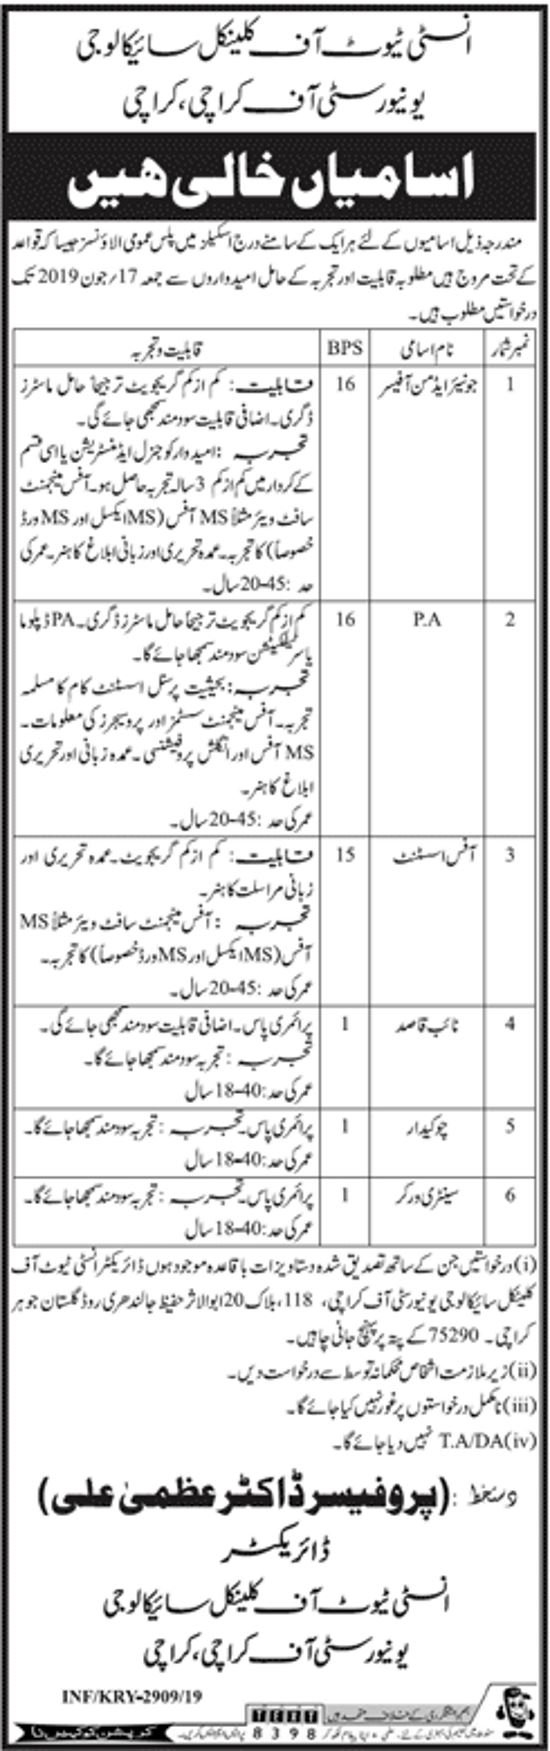 University of Karachi Jobs 2019 for Junior Admin Officer, PA, Office Assistant & Support Staff